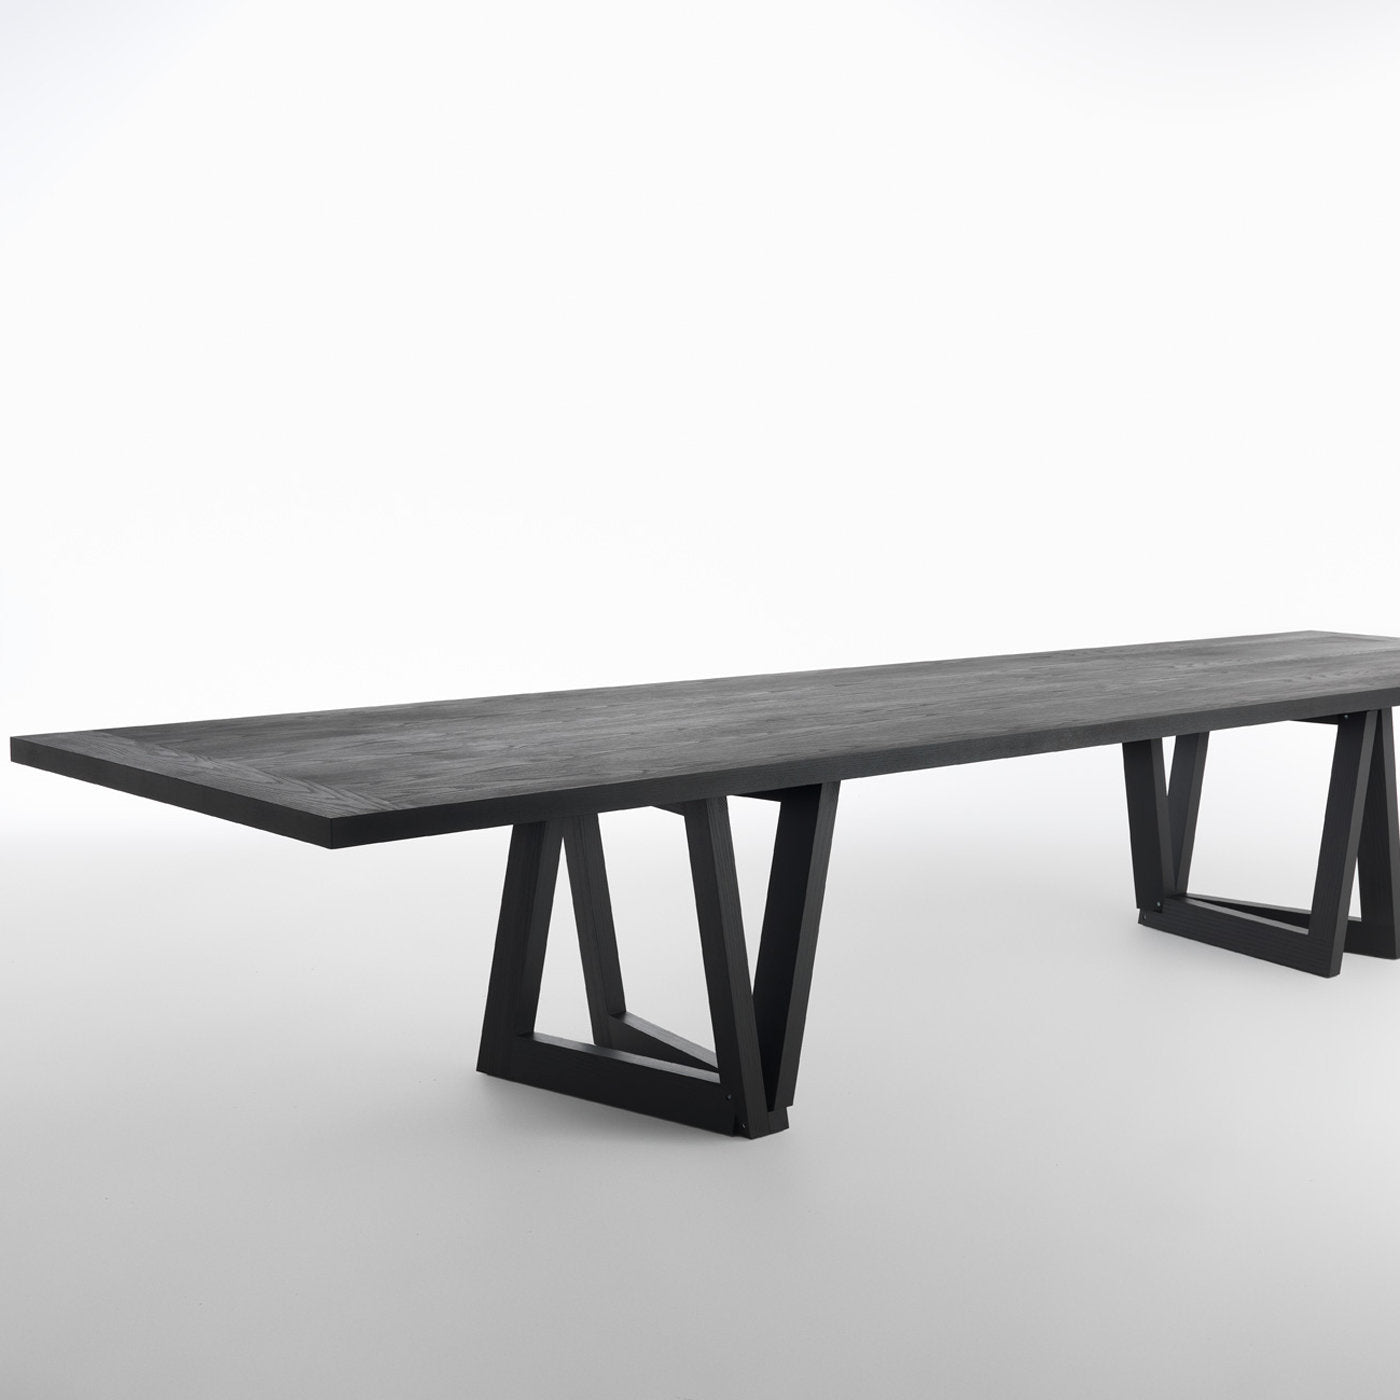 QuaDror 03 Dining Table by Dror - Alternative view 1